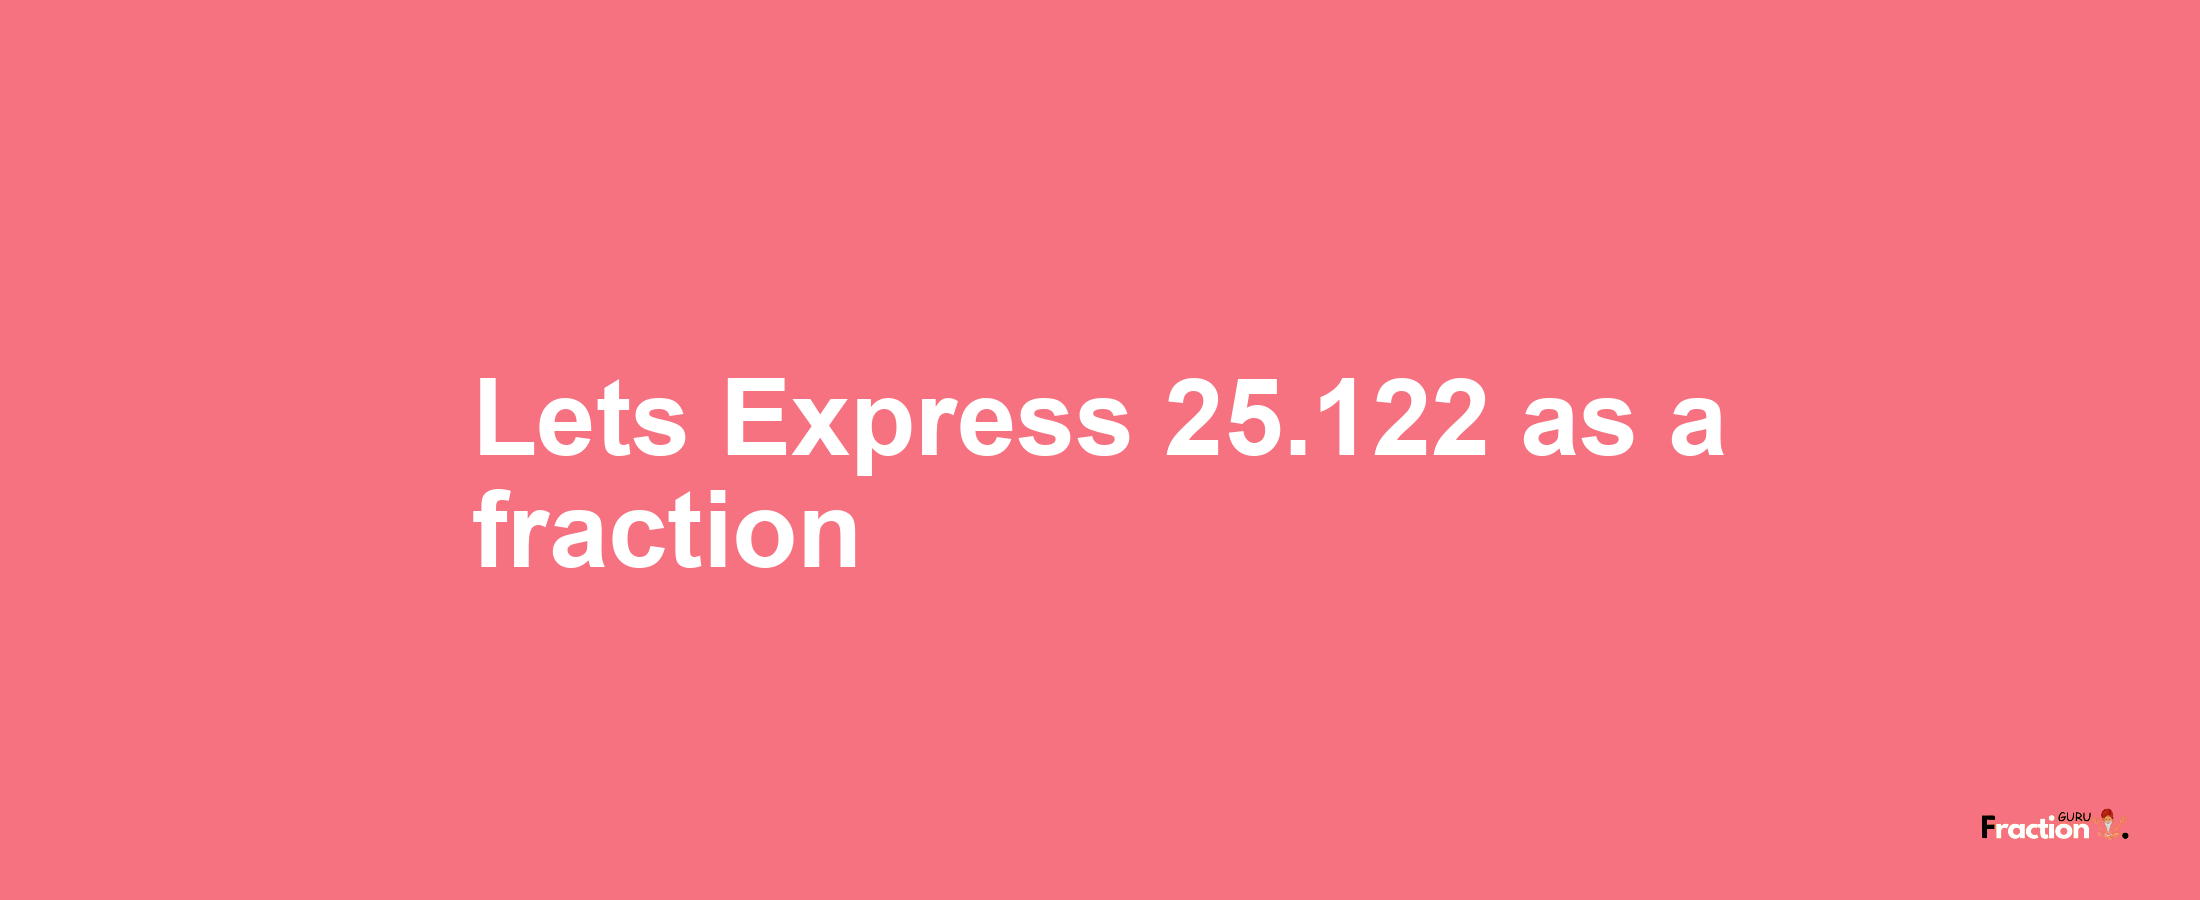 Lets Express 25.122 as afraction